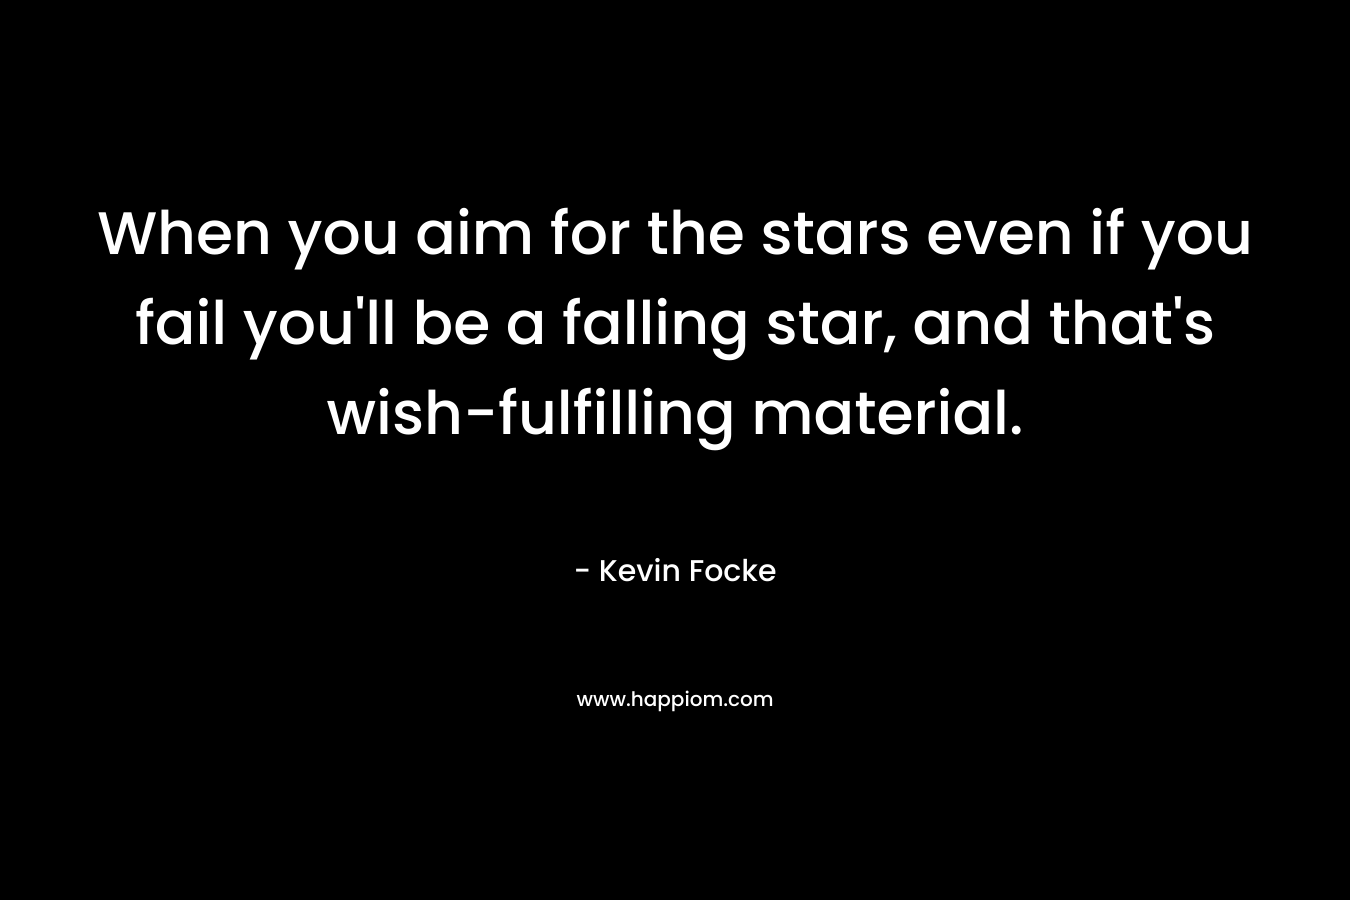 When you aim for the stars even if you fail you’ll be a falling star, and that’s wish-fulfilling material. – Kevin Focke